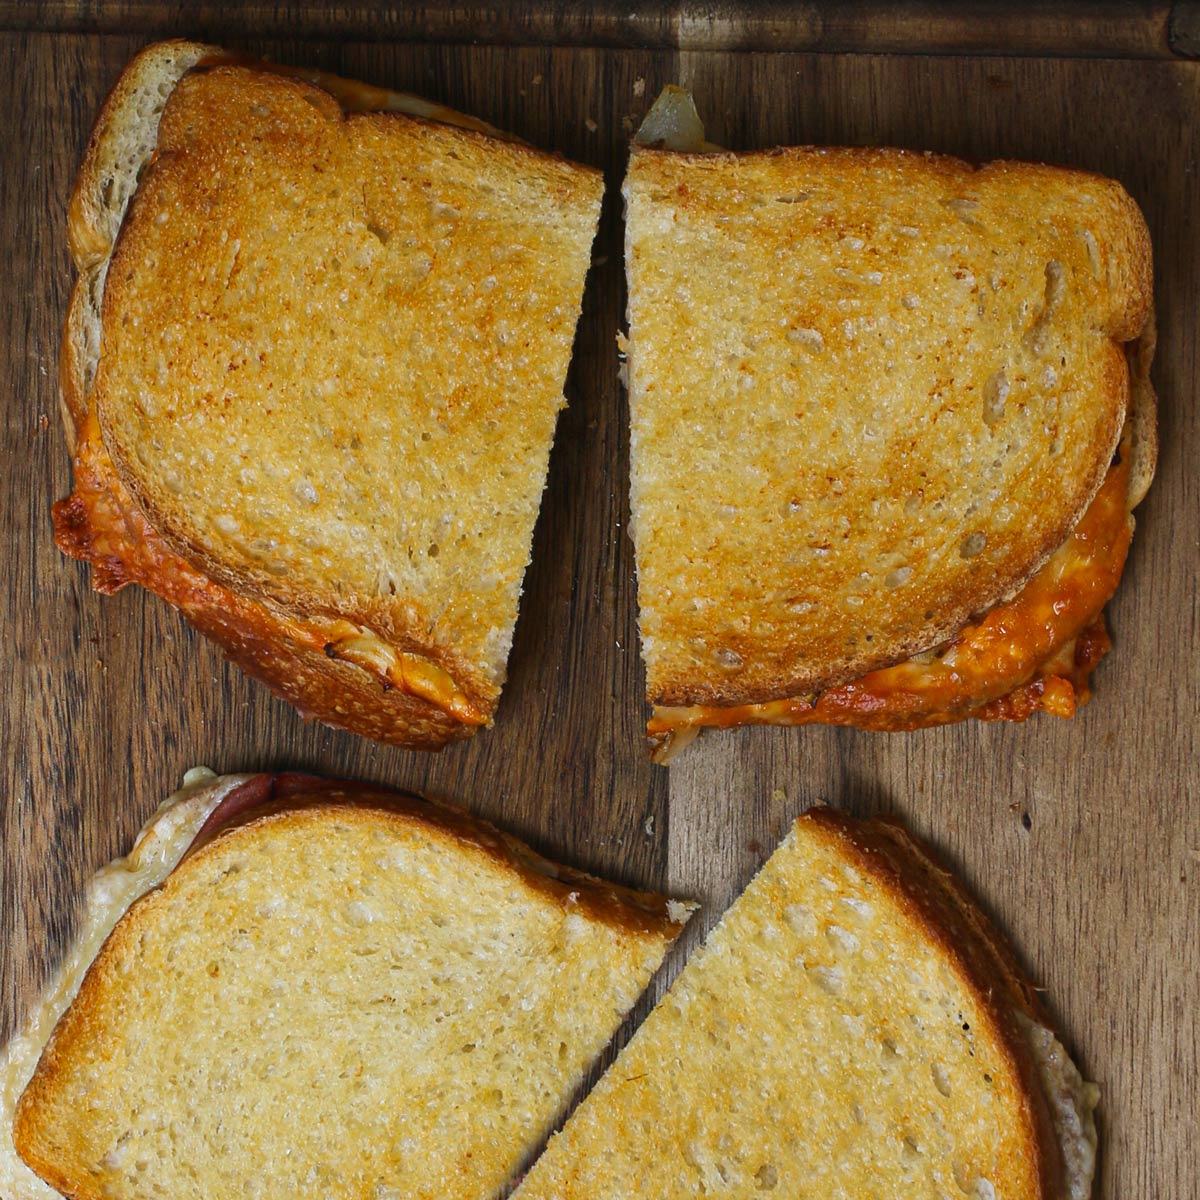 air fryer grilled cheese sandwiches on board, cut in half.